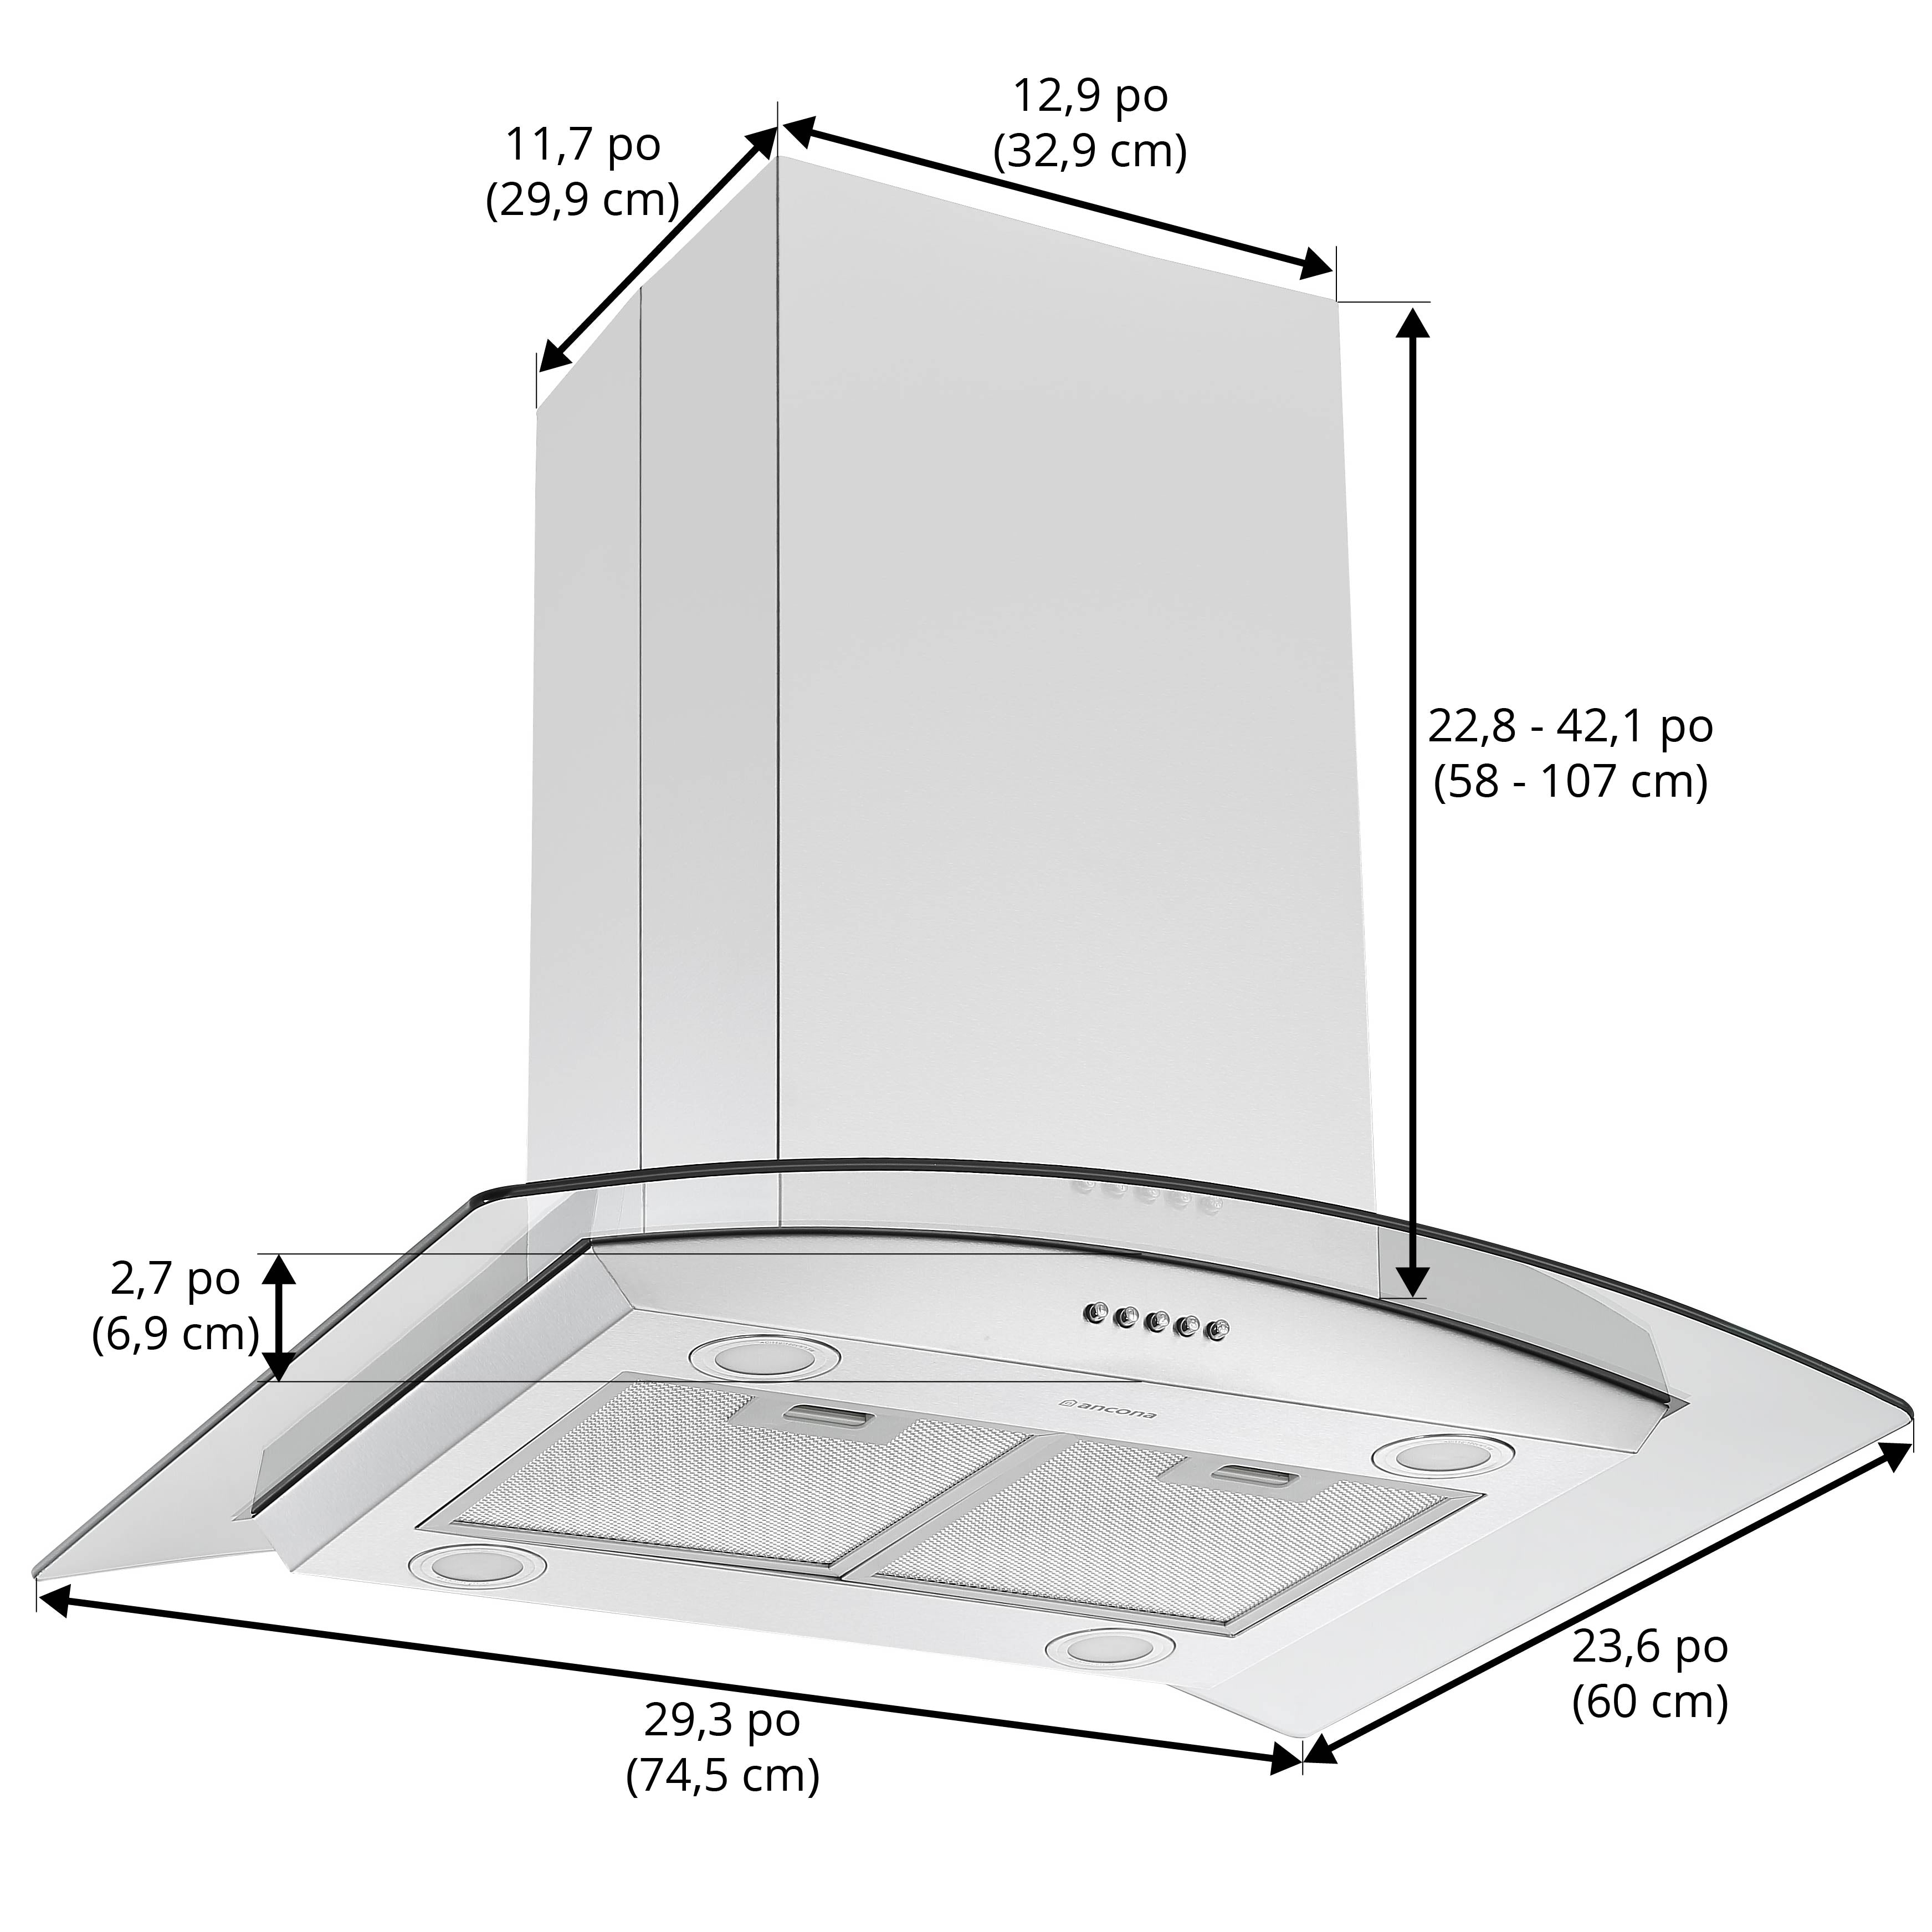 30 in. Convertible Island Mount Glass Canopy Range Hood in Stainless Steel